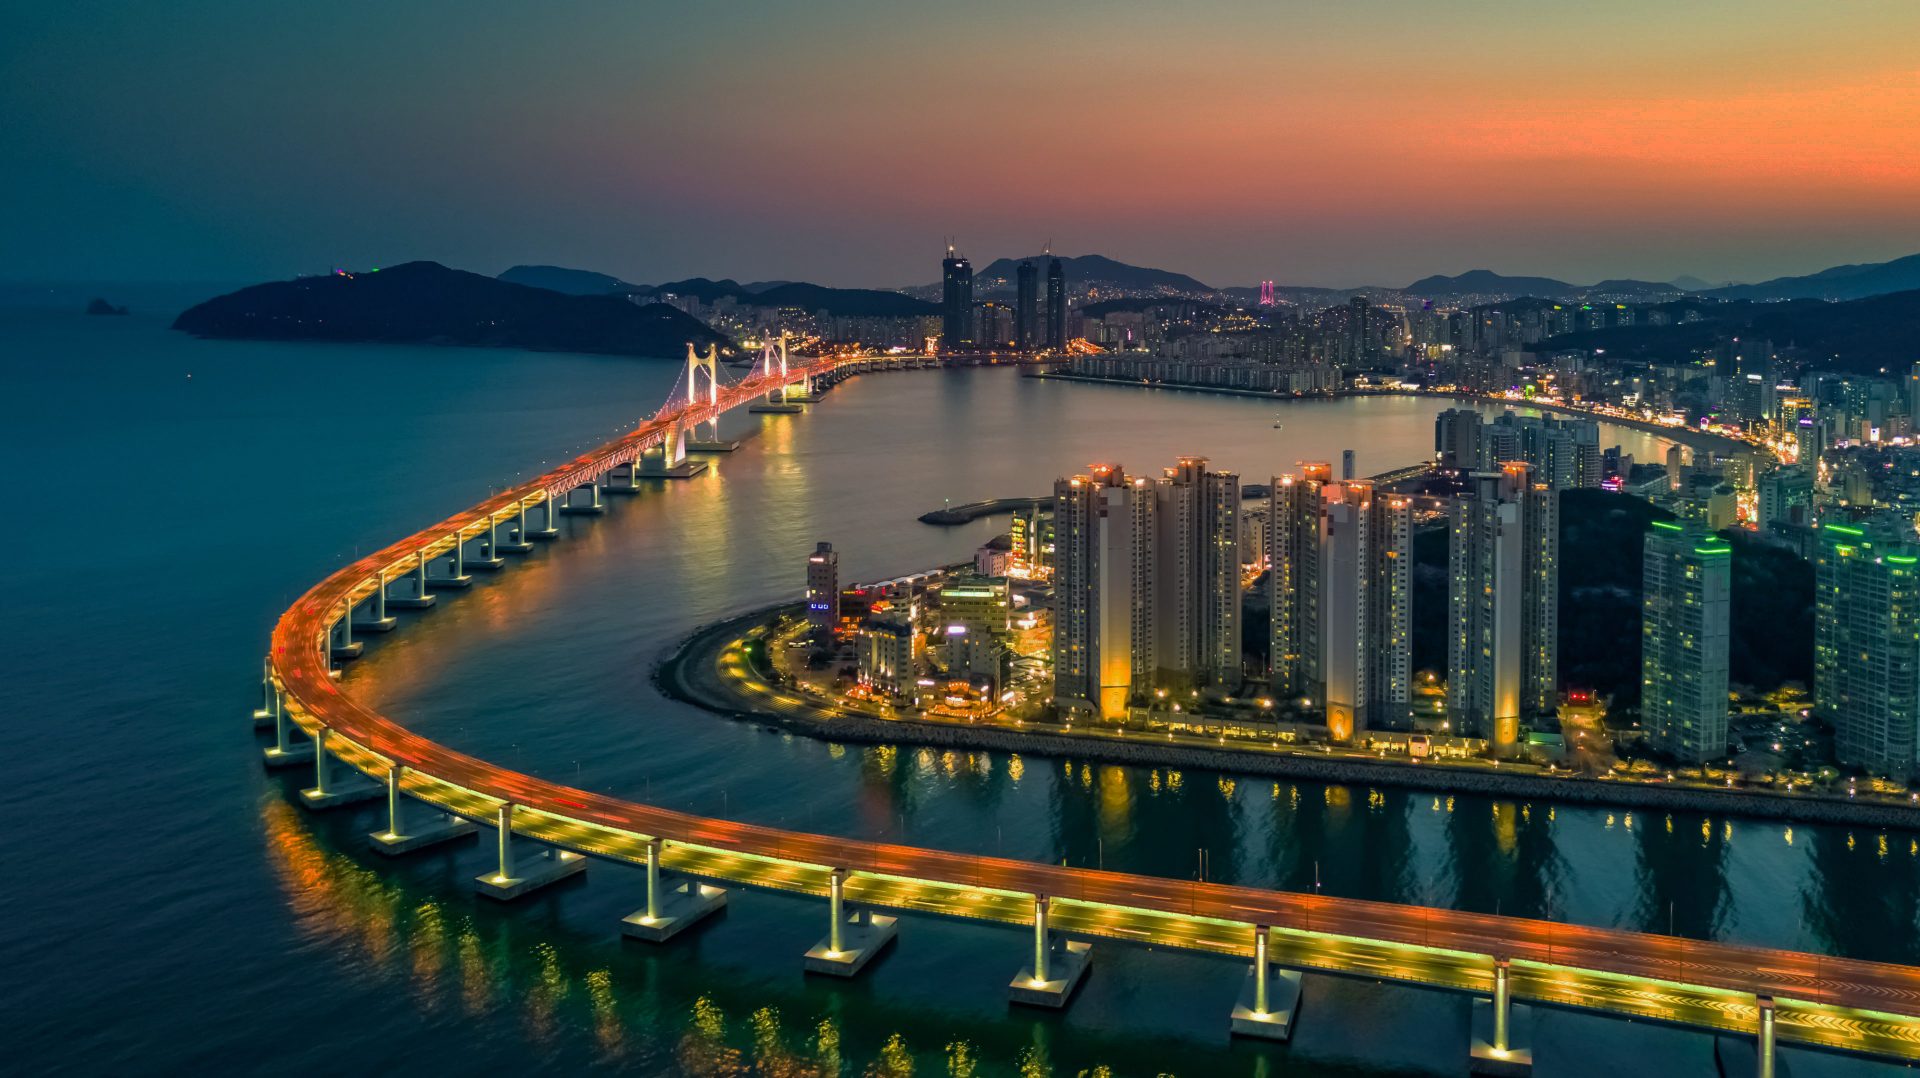 View across the water of the Busan skyline illuminated in different colours at night